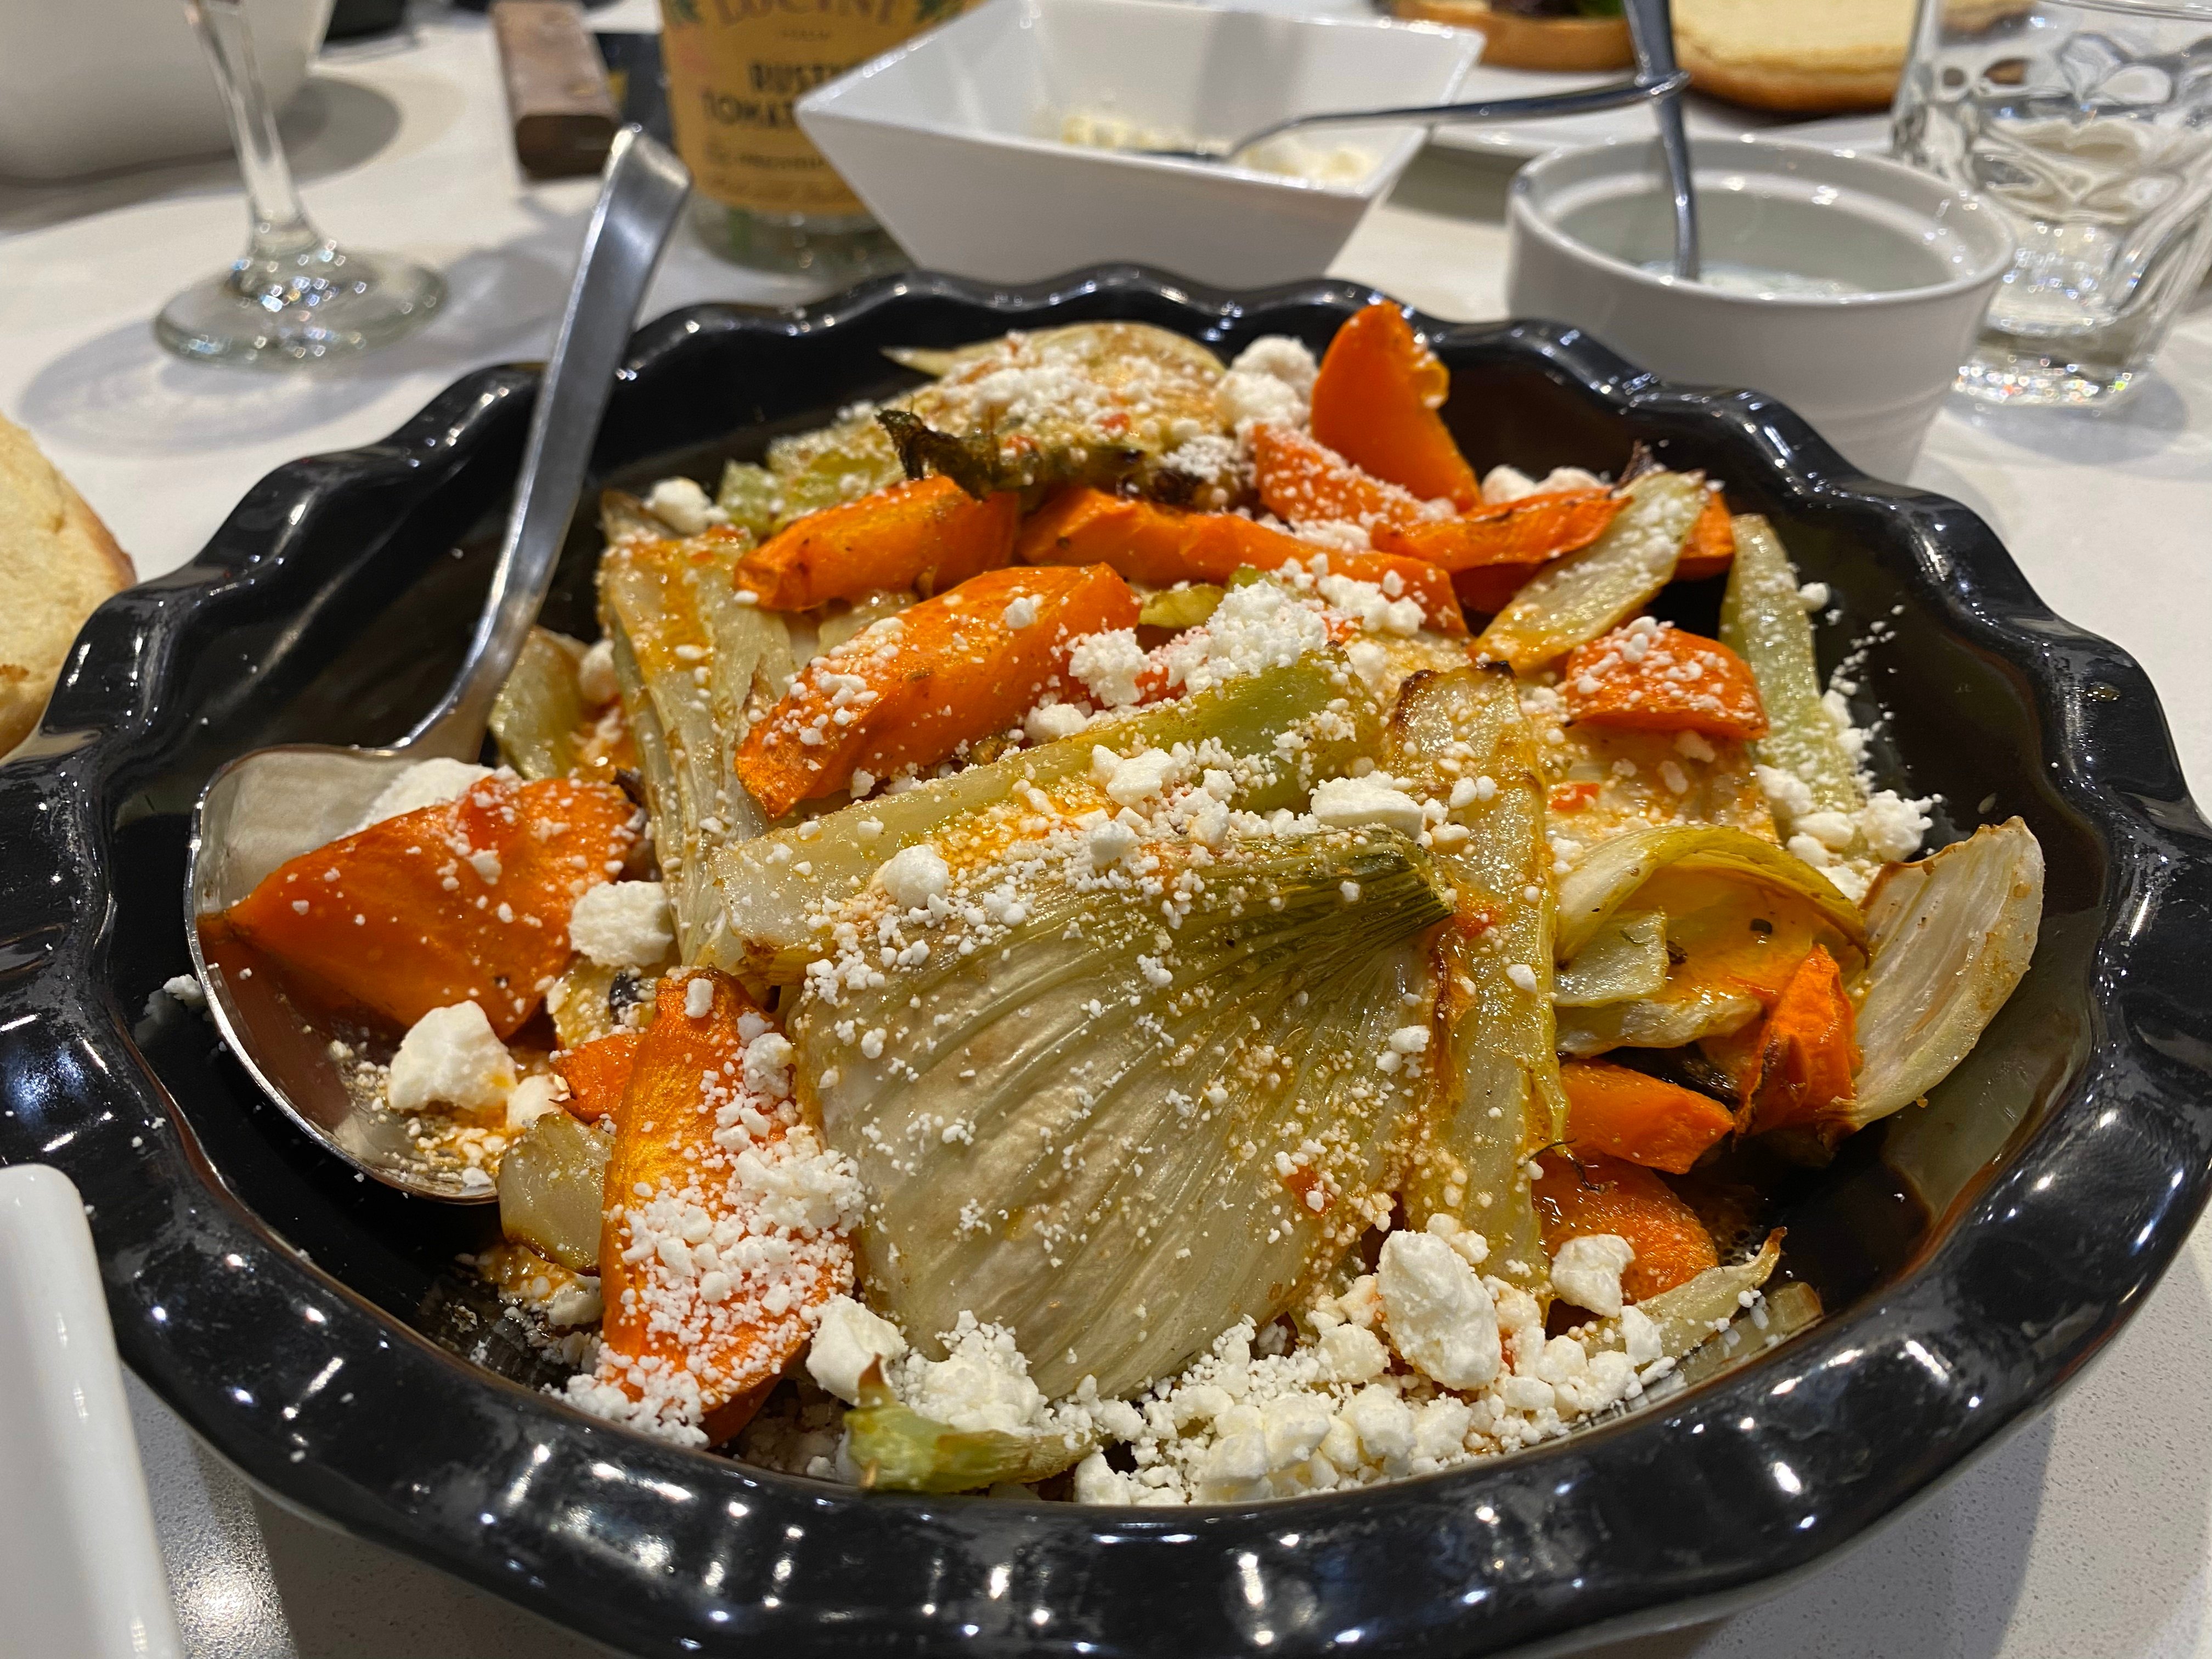 Roasted Carrot and Fennel Salad with Feta and Harissa Vinaigrette